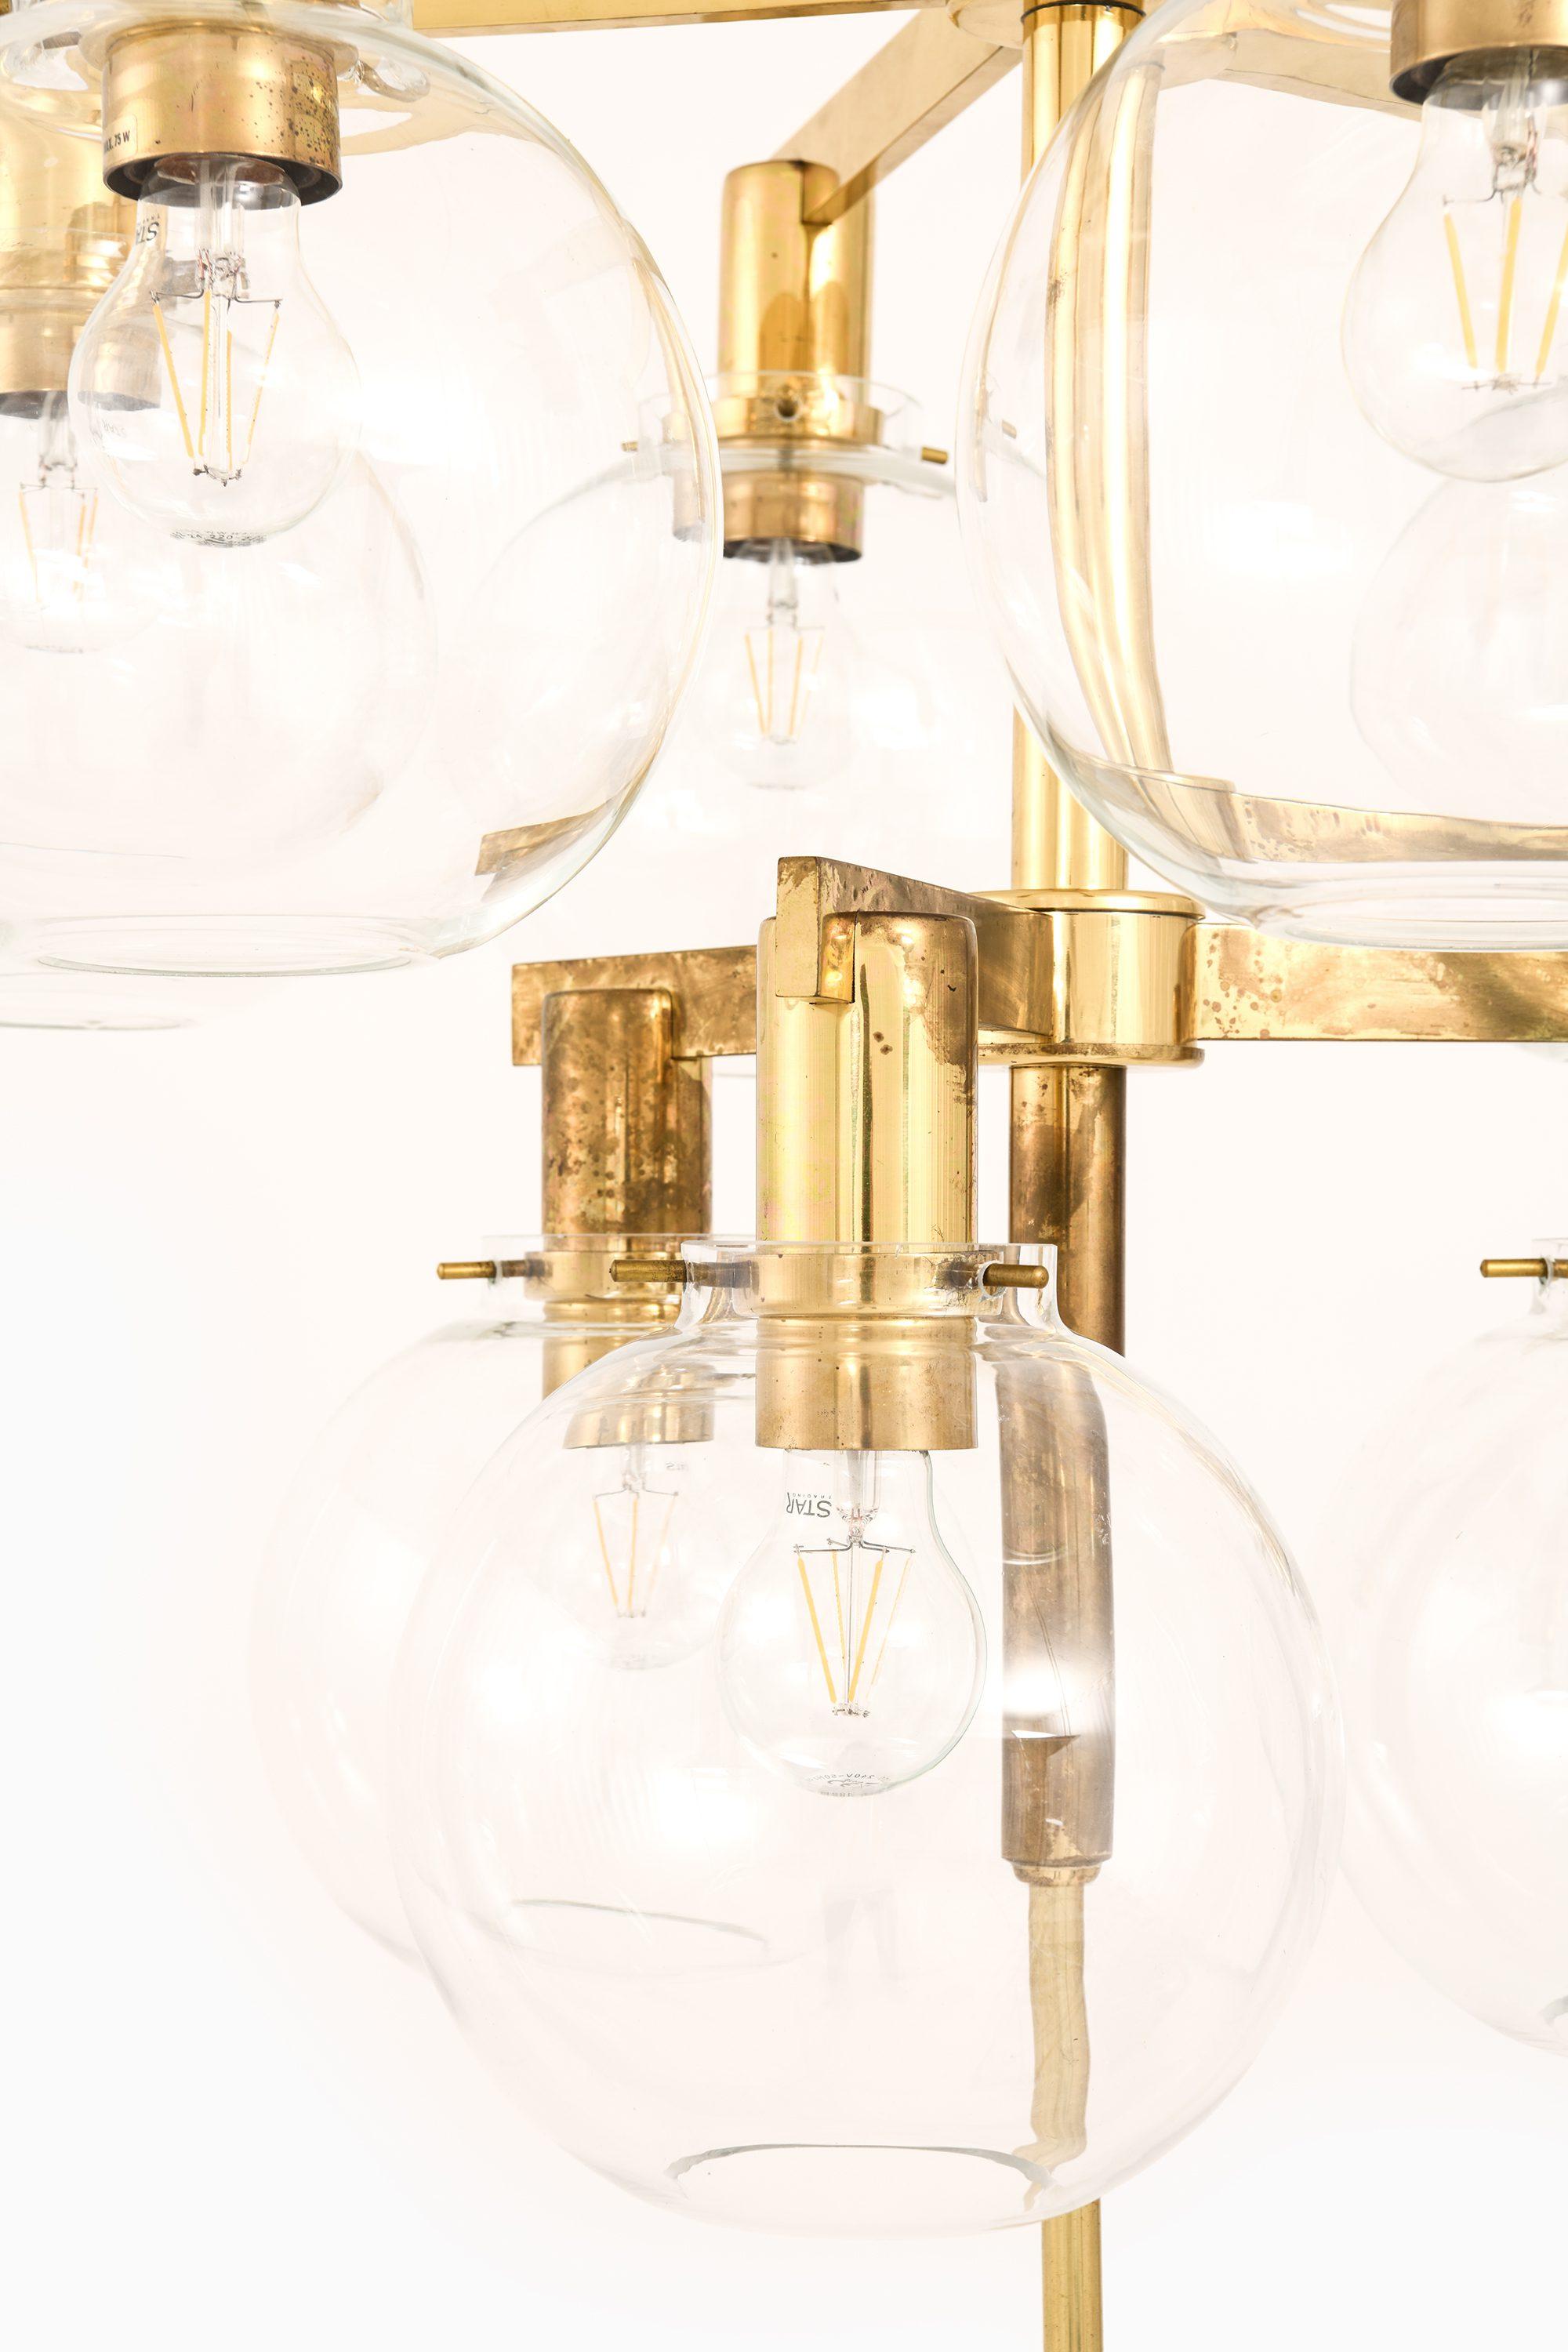 Small Ceiling Lamp Chandelier in Brass and Glass by Hans-Agne Jakobsson, 1950's

Additional Information:
Material: Brass and glass
Style: Mid century, Scandinavian
Rare ceiling lamp model T 348/9
Produced by Hans-Agne Jakobsson AB in Markaryd,